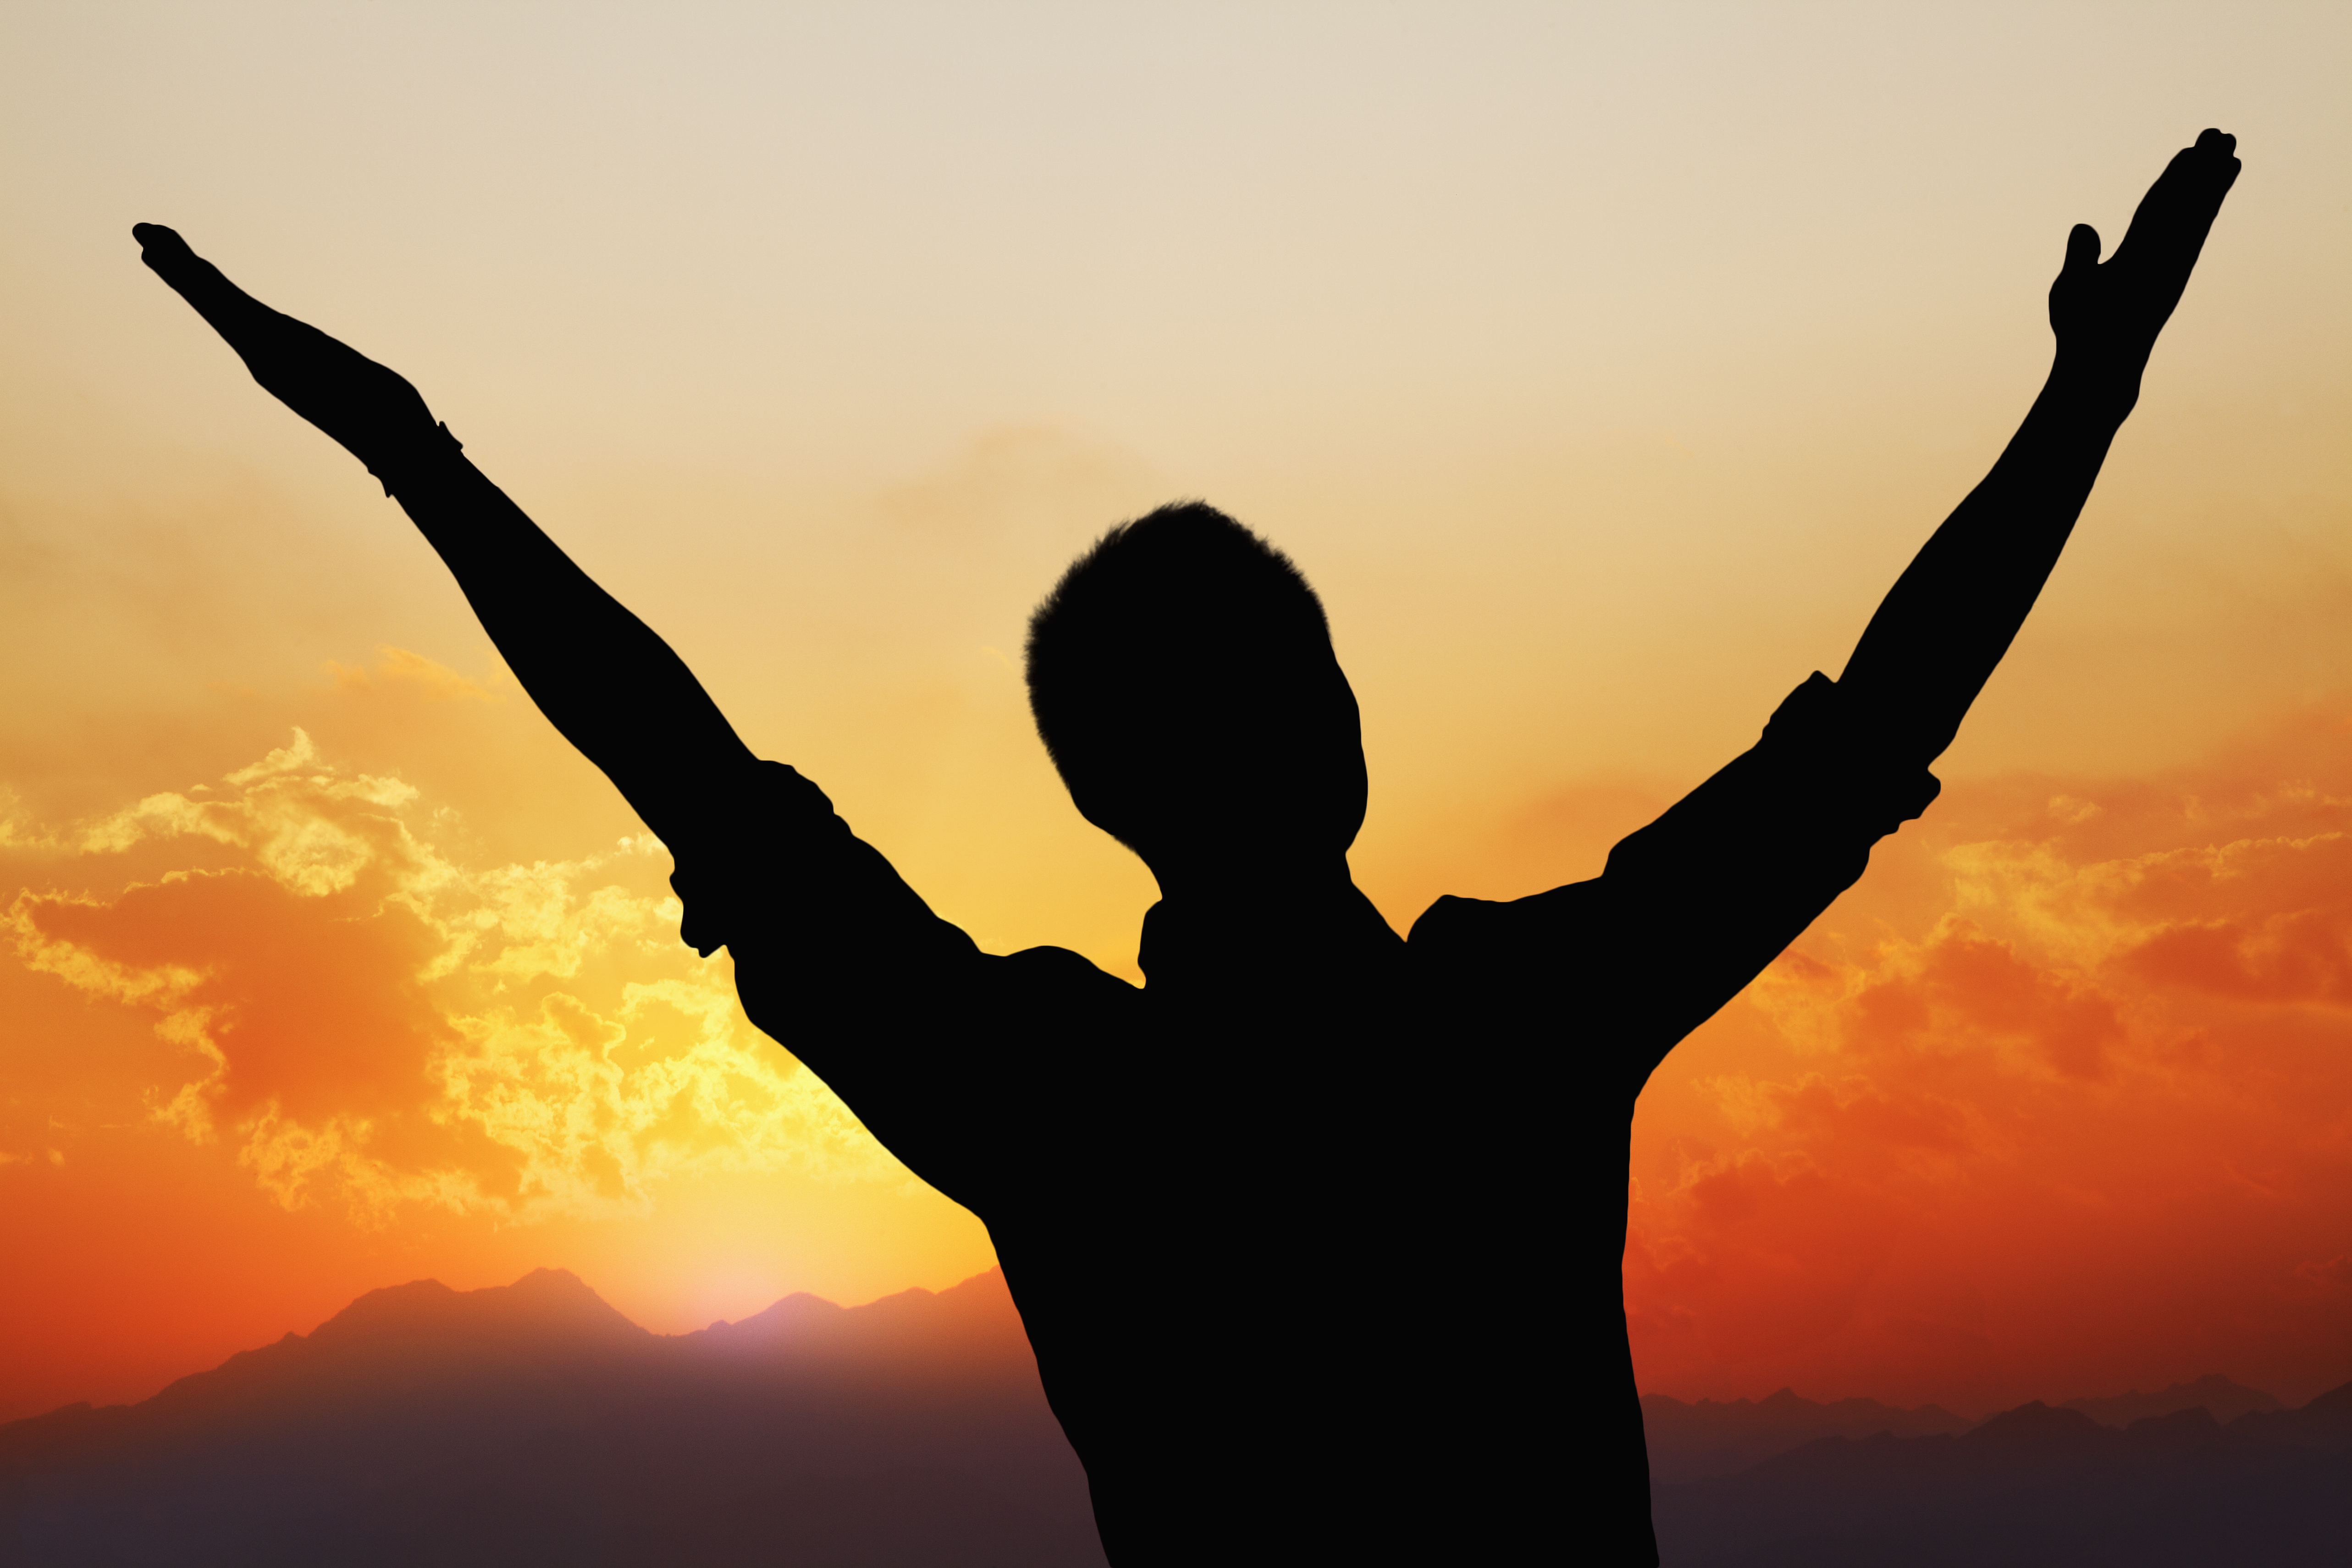 Silhouette of a man with arms raised high with a beautiful sunset and landscape in the background